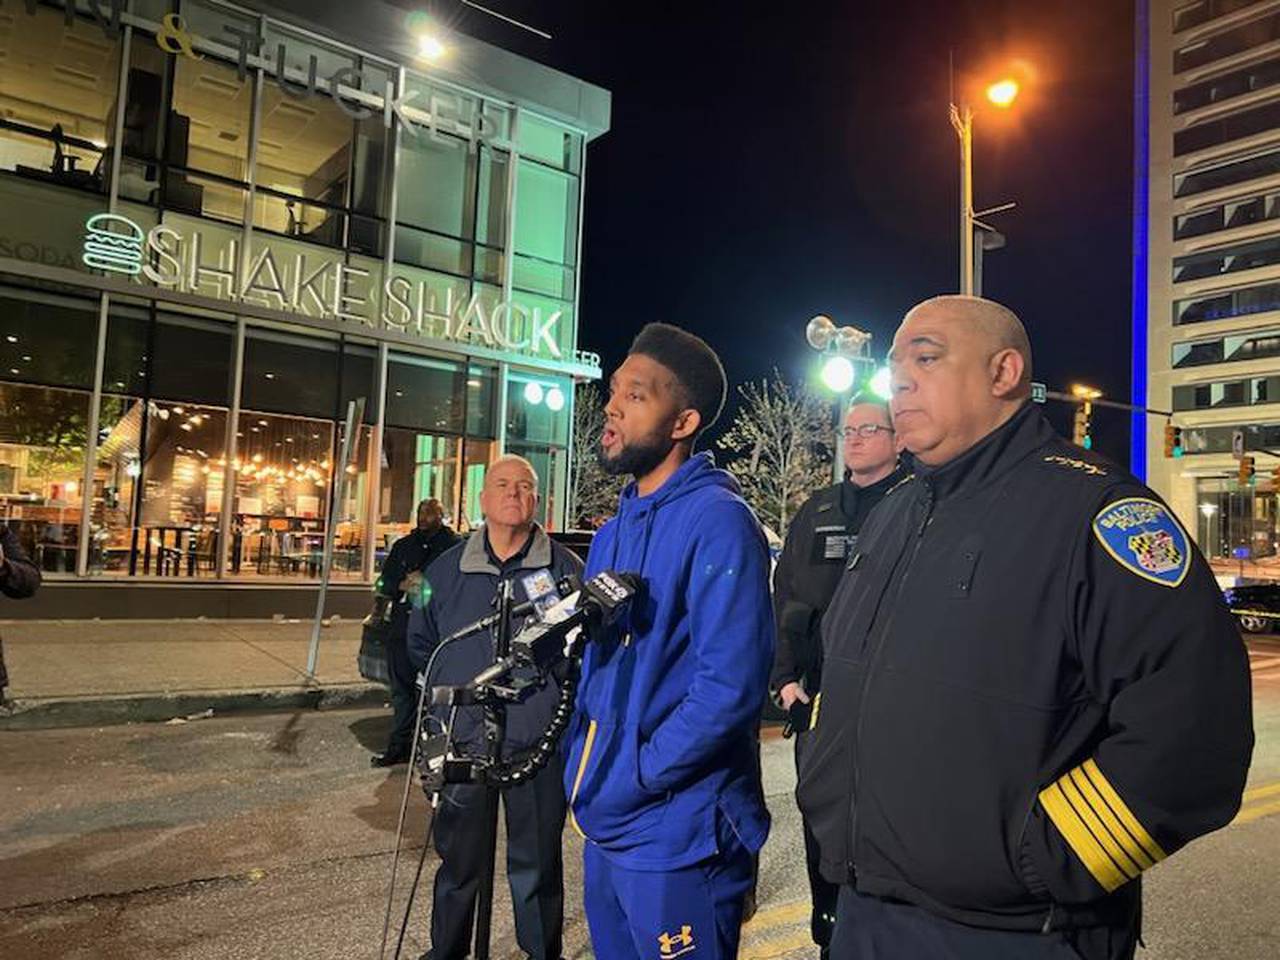 Mayor Scott, center, joined by Baltimore Police Commissioner Michael Harrison, right, and other officials, speaks at a press conference after two teens were injured in a shooting in the 400 block of East Pratt Street.